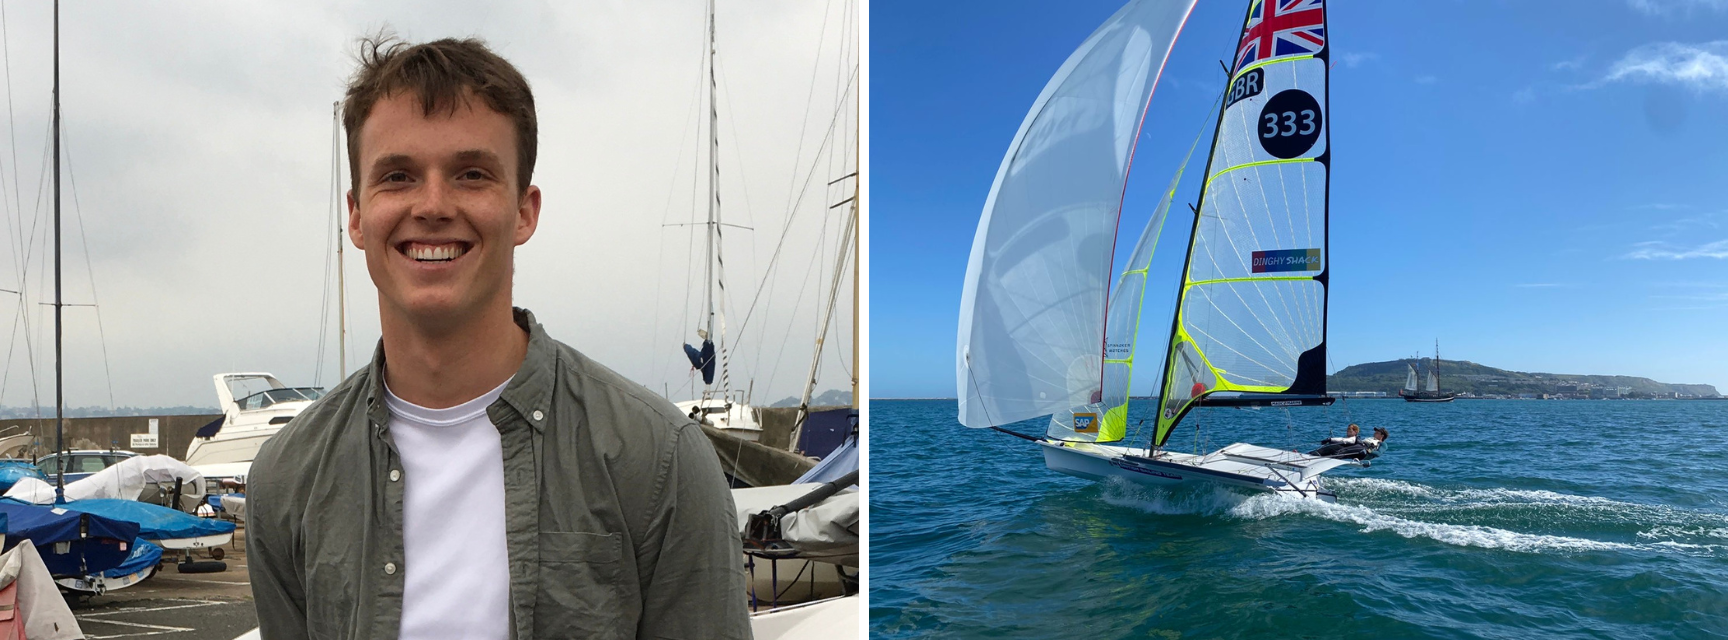 A profile image of Fin Armstrong next to a photo of him sailing